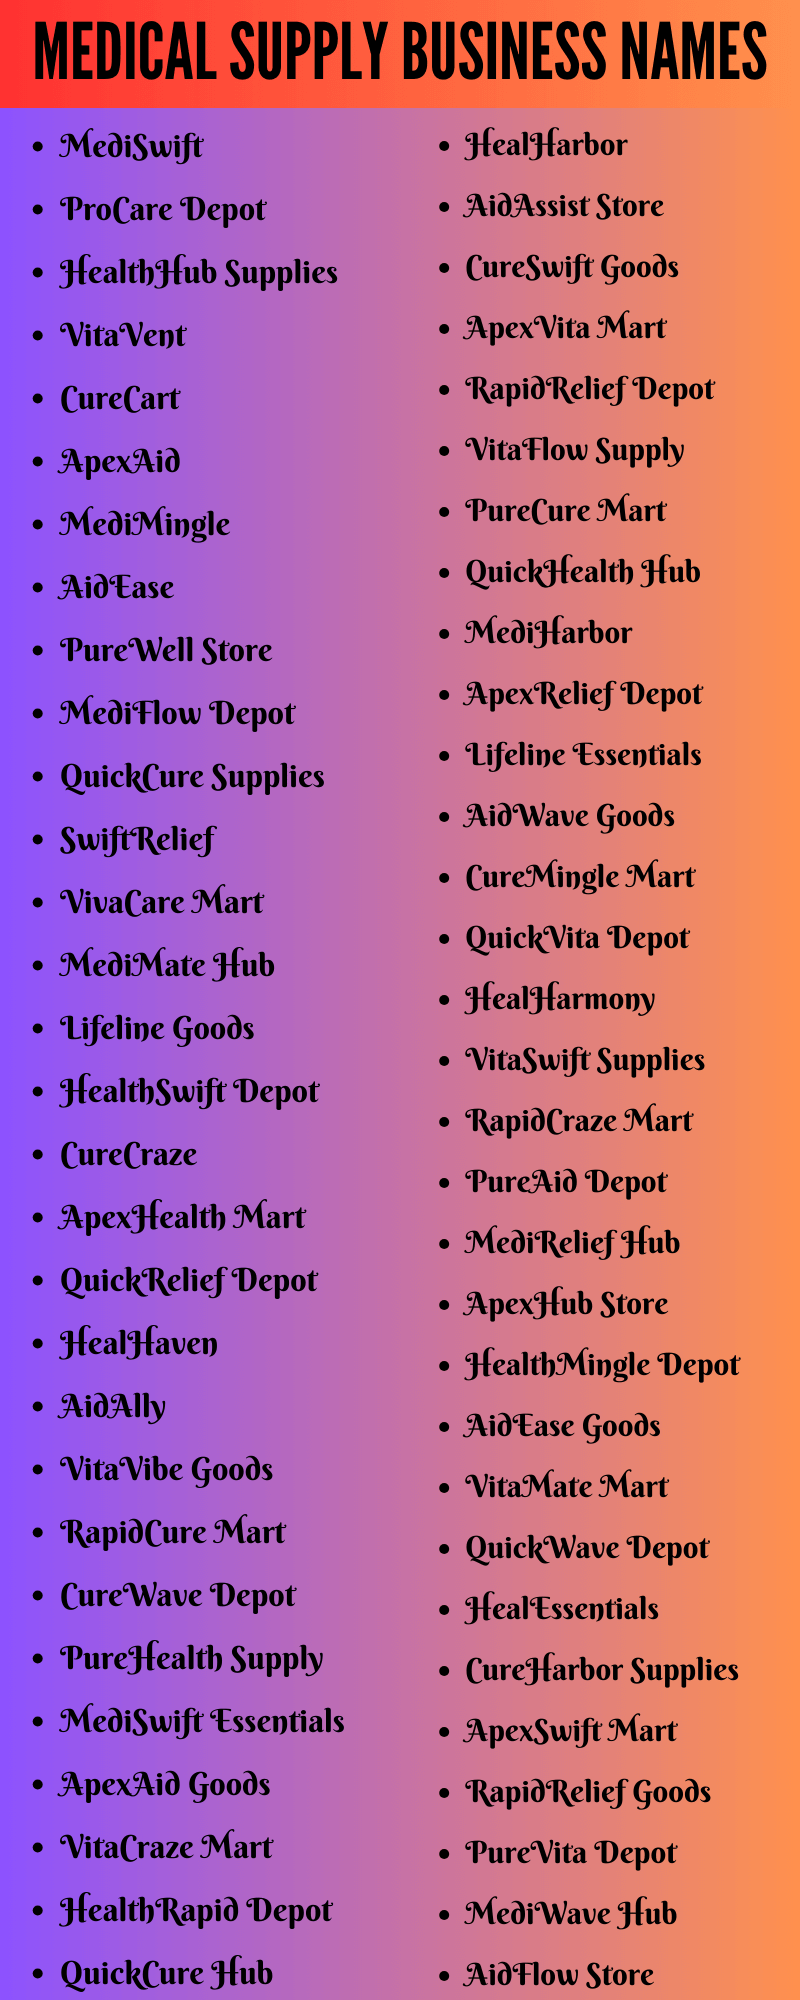 Medical Supply Business Names